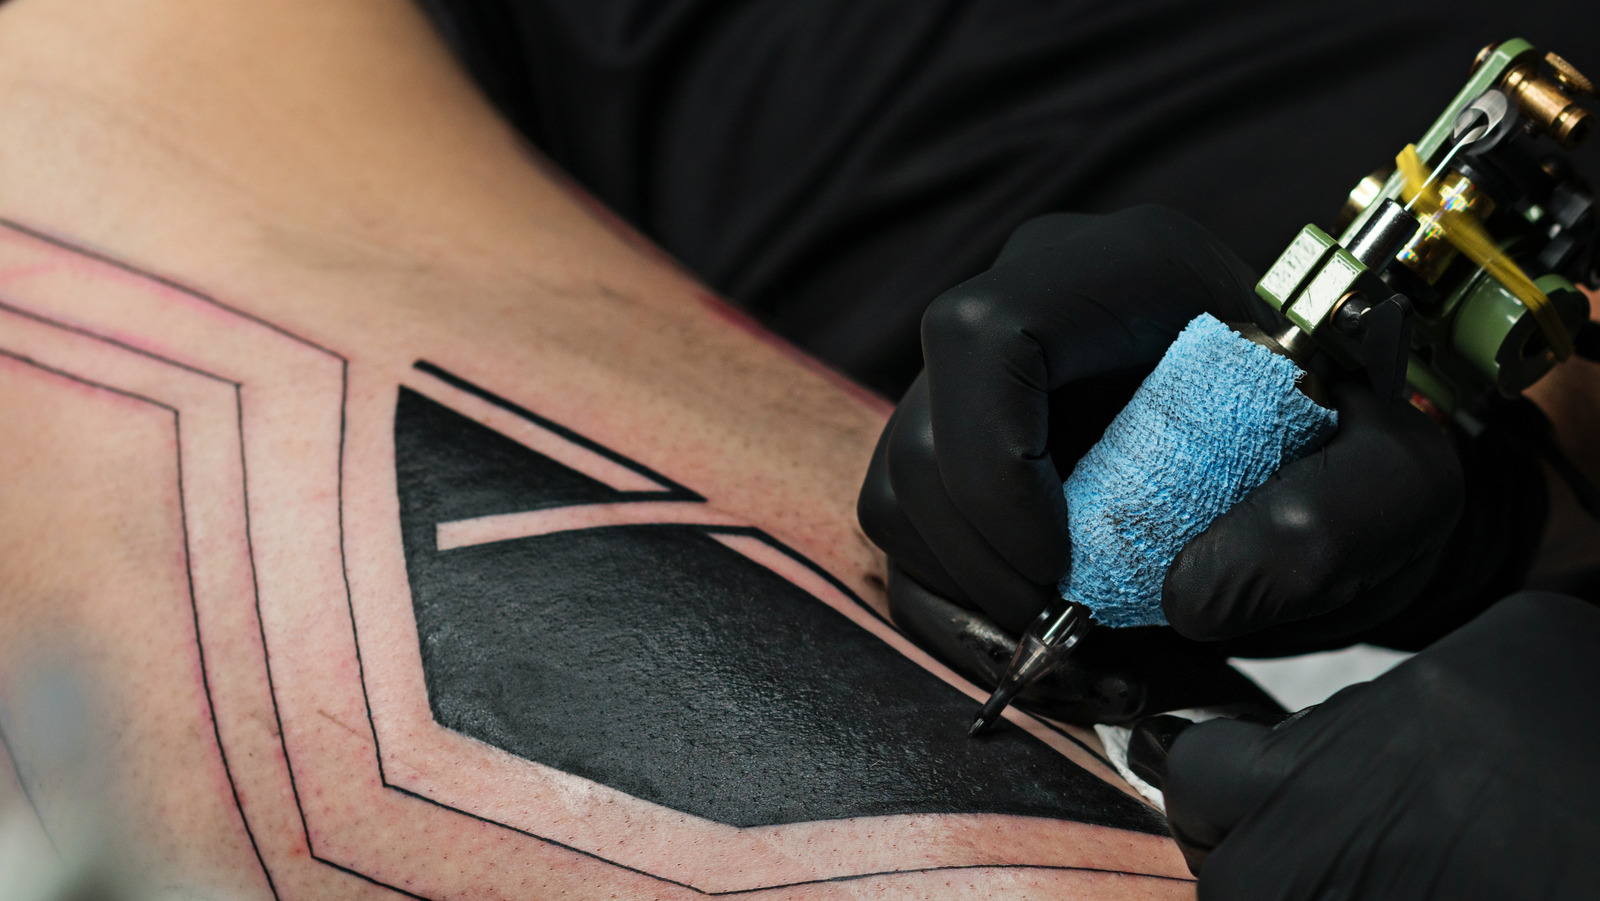 Scientists explore chemistry of tattoo inks amid growing safety concerns   Ars Technica